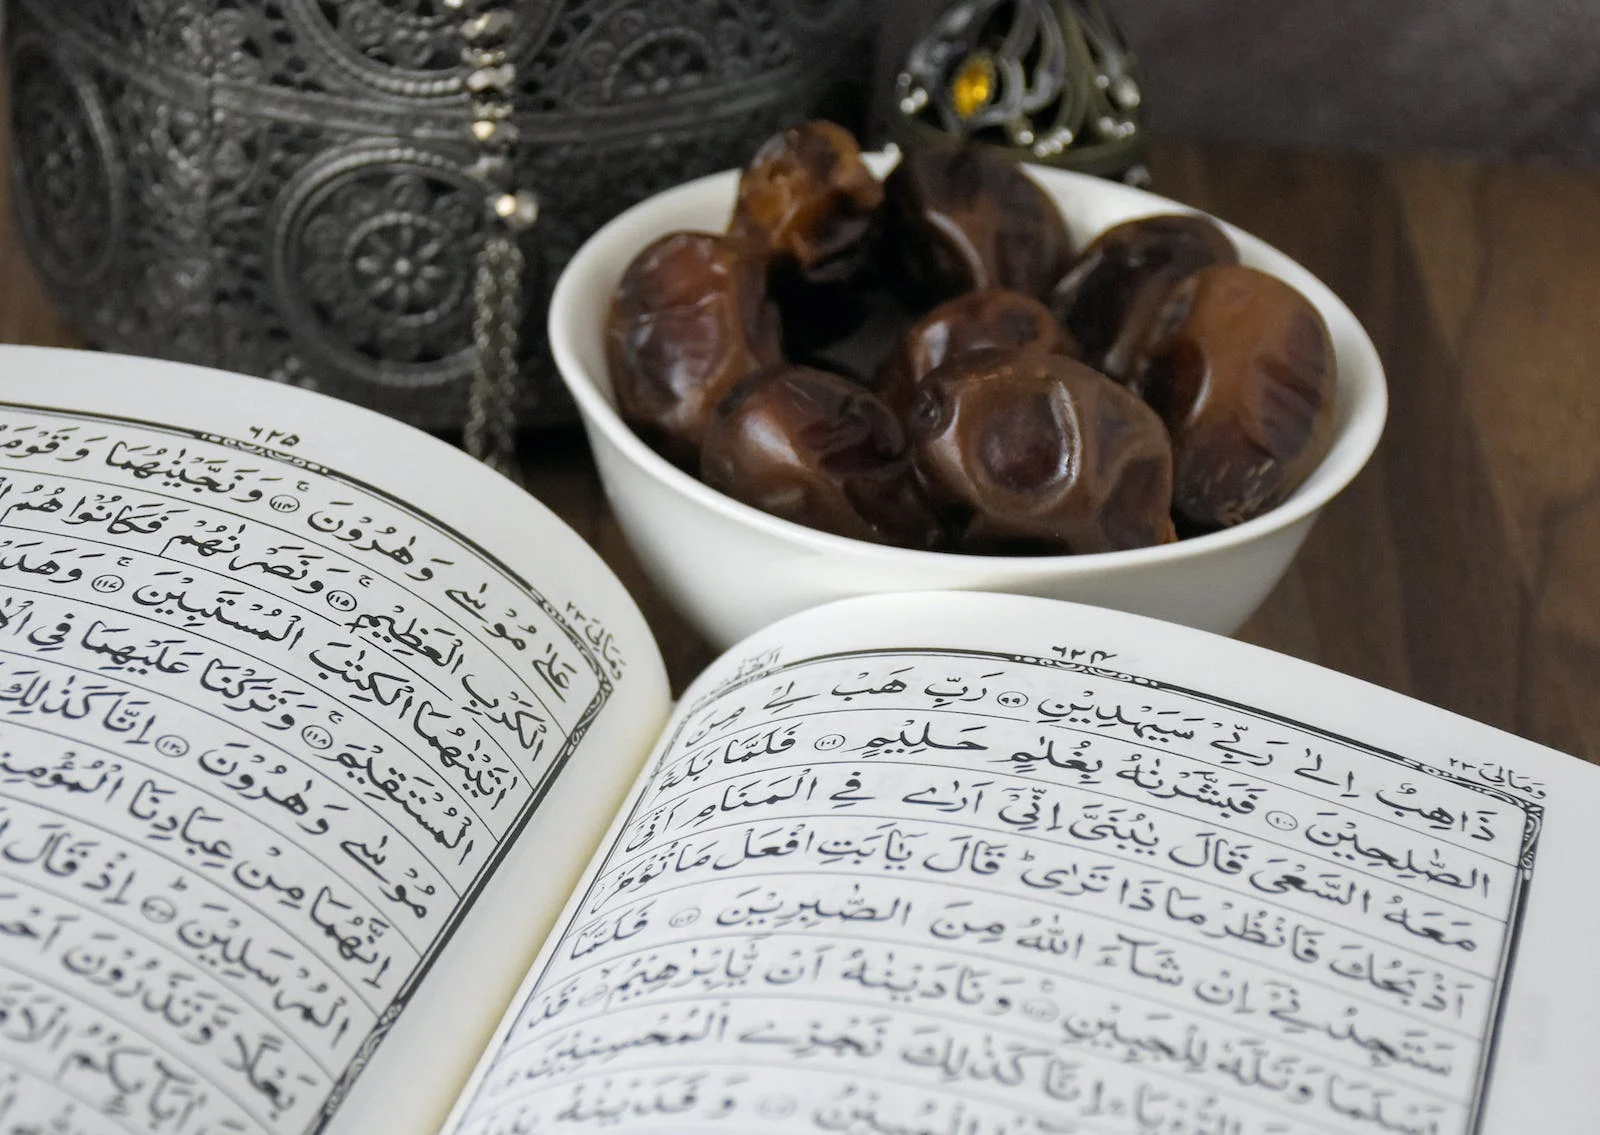 Benefits of having a schedule for memorizing the Qur'an